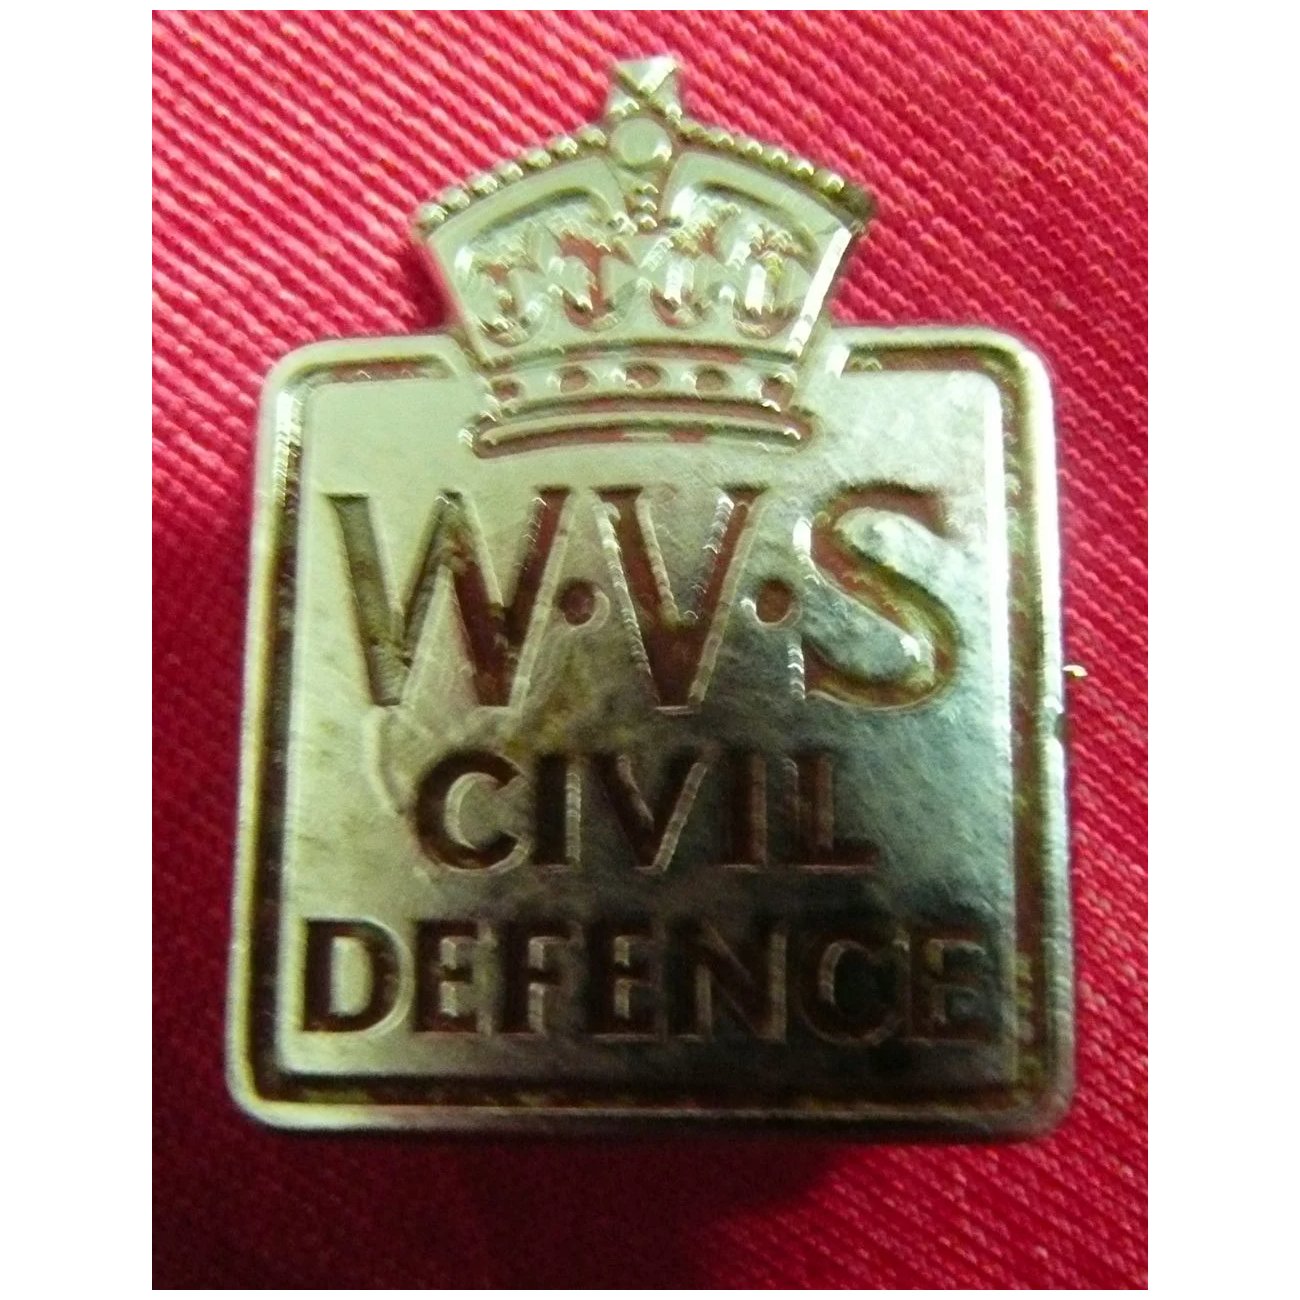 WWII Badge - Women's Voluntary Service for Civil Defense.